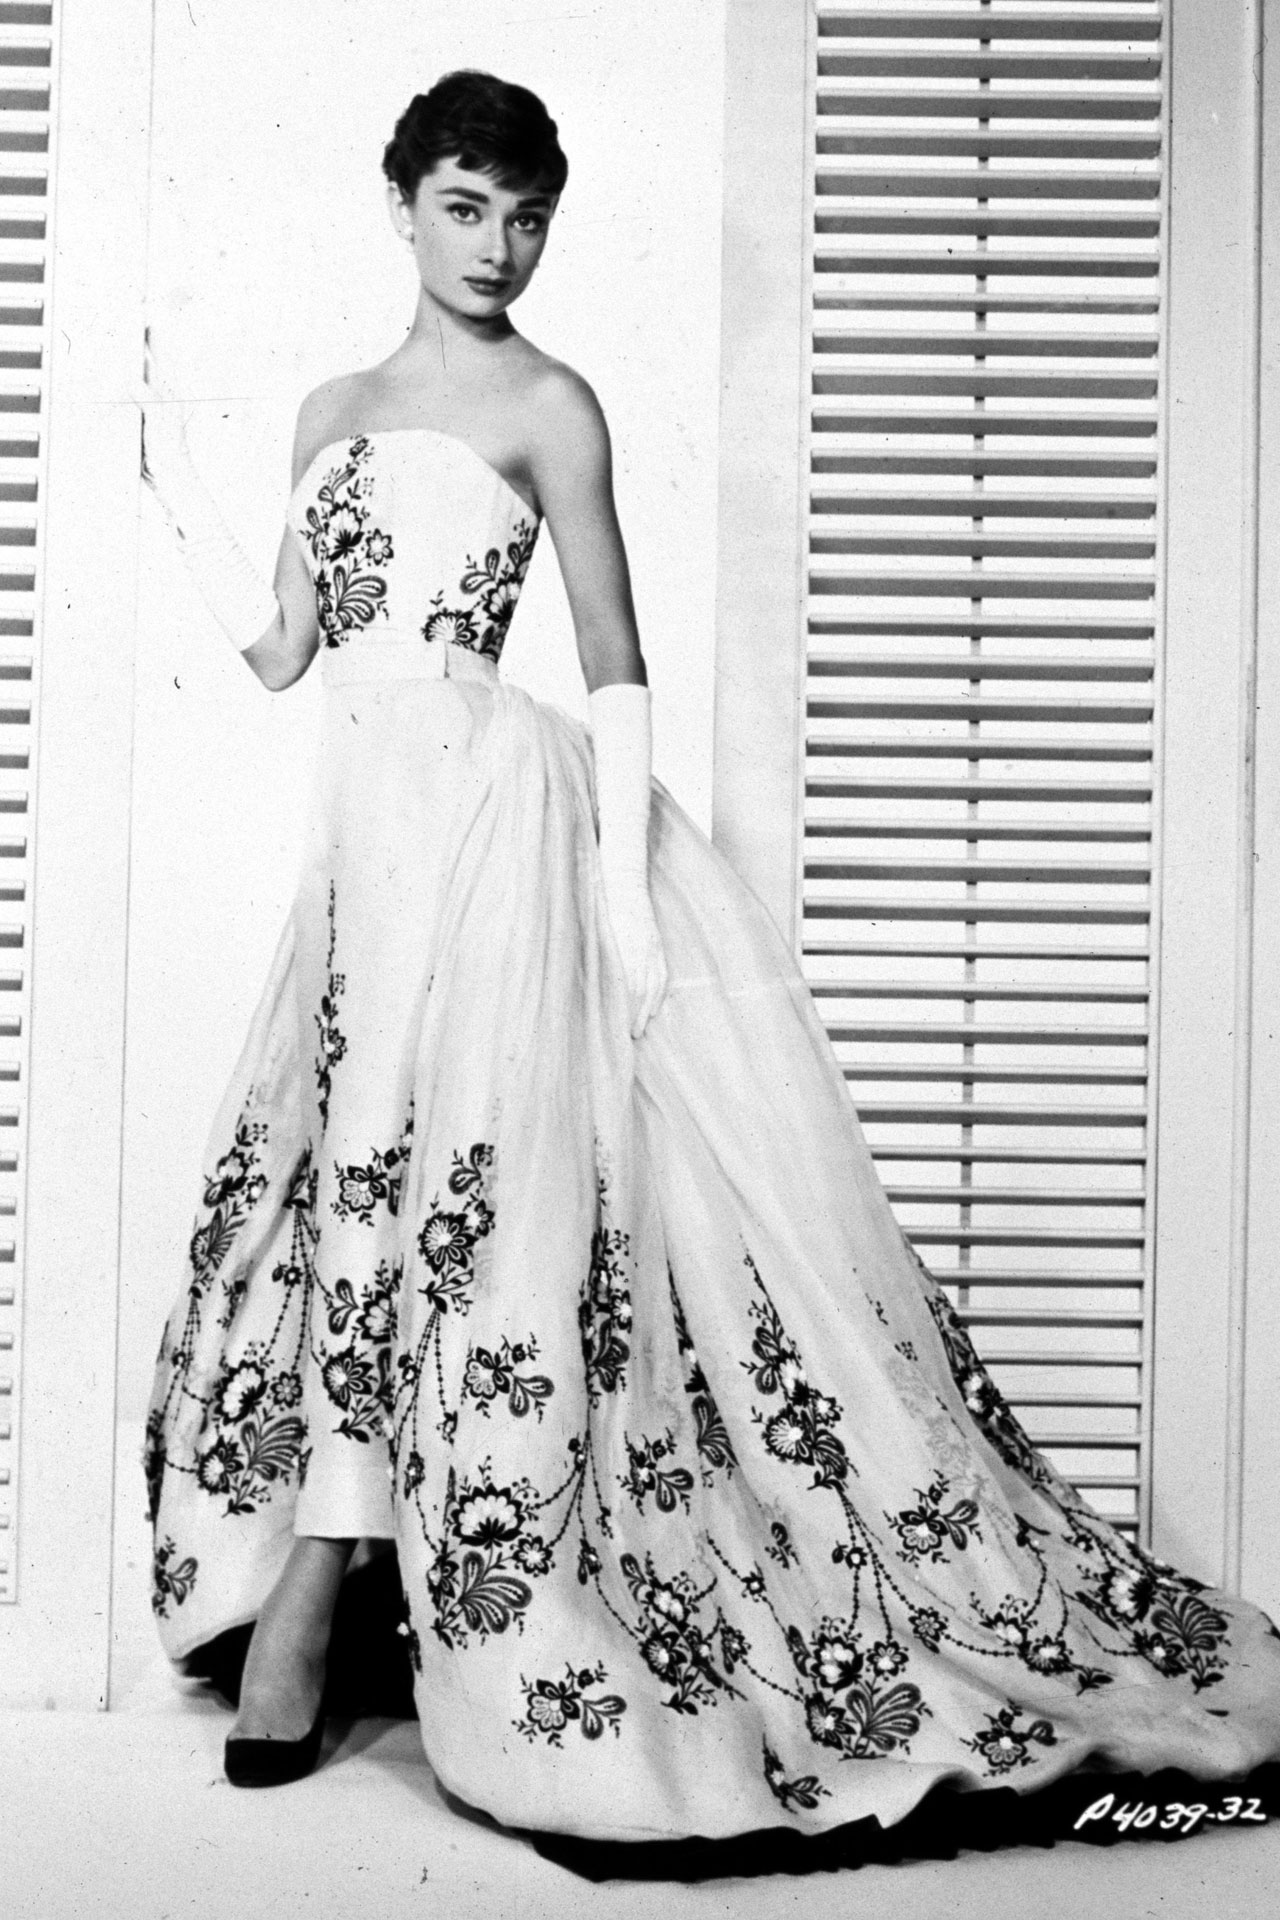 The white ball gown with black flower embroidery designed by Givenchy appeared in 1954's Sabrina